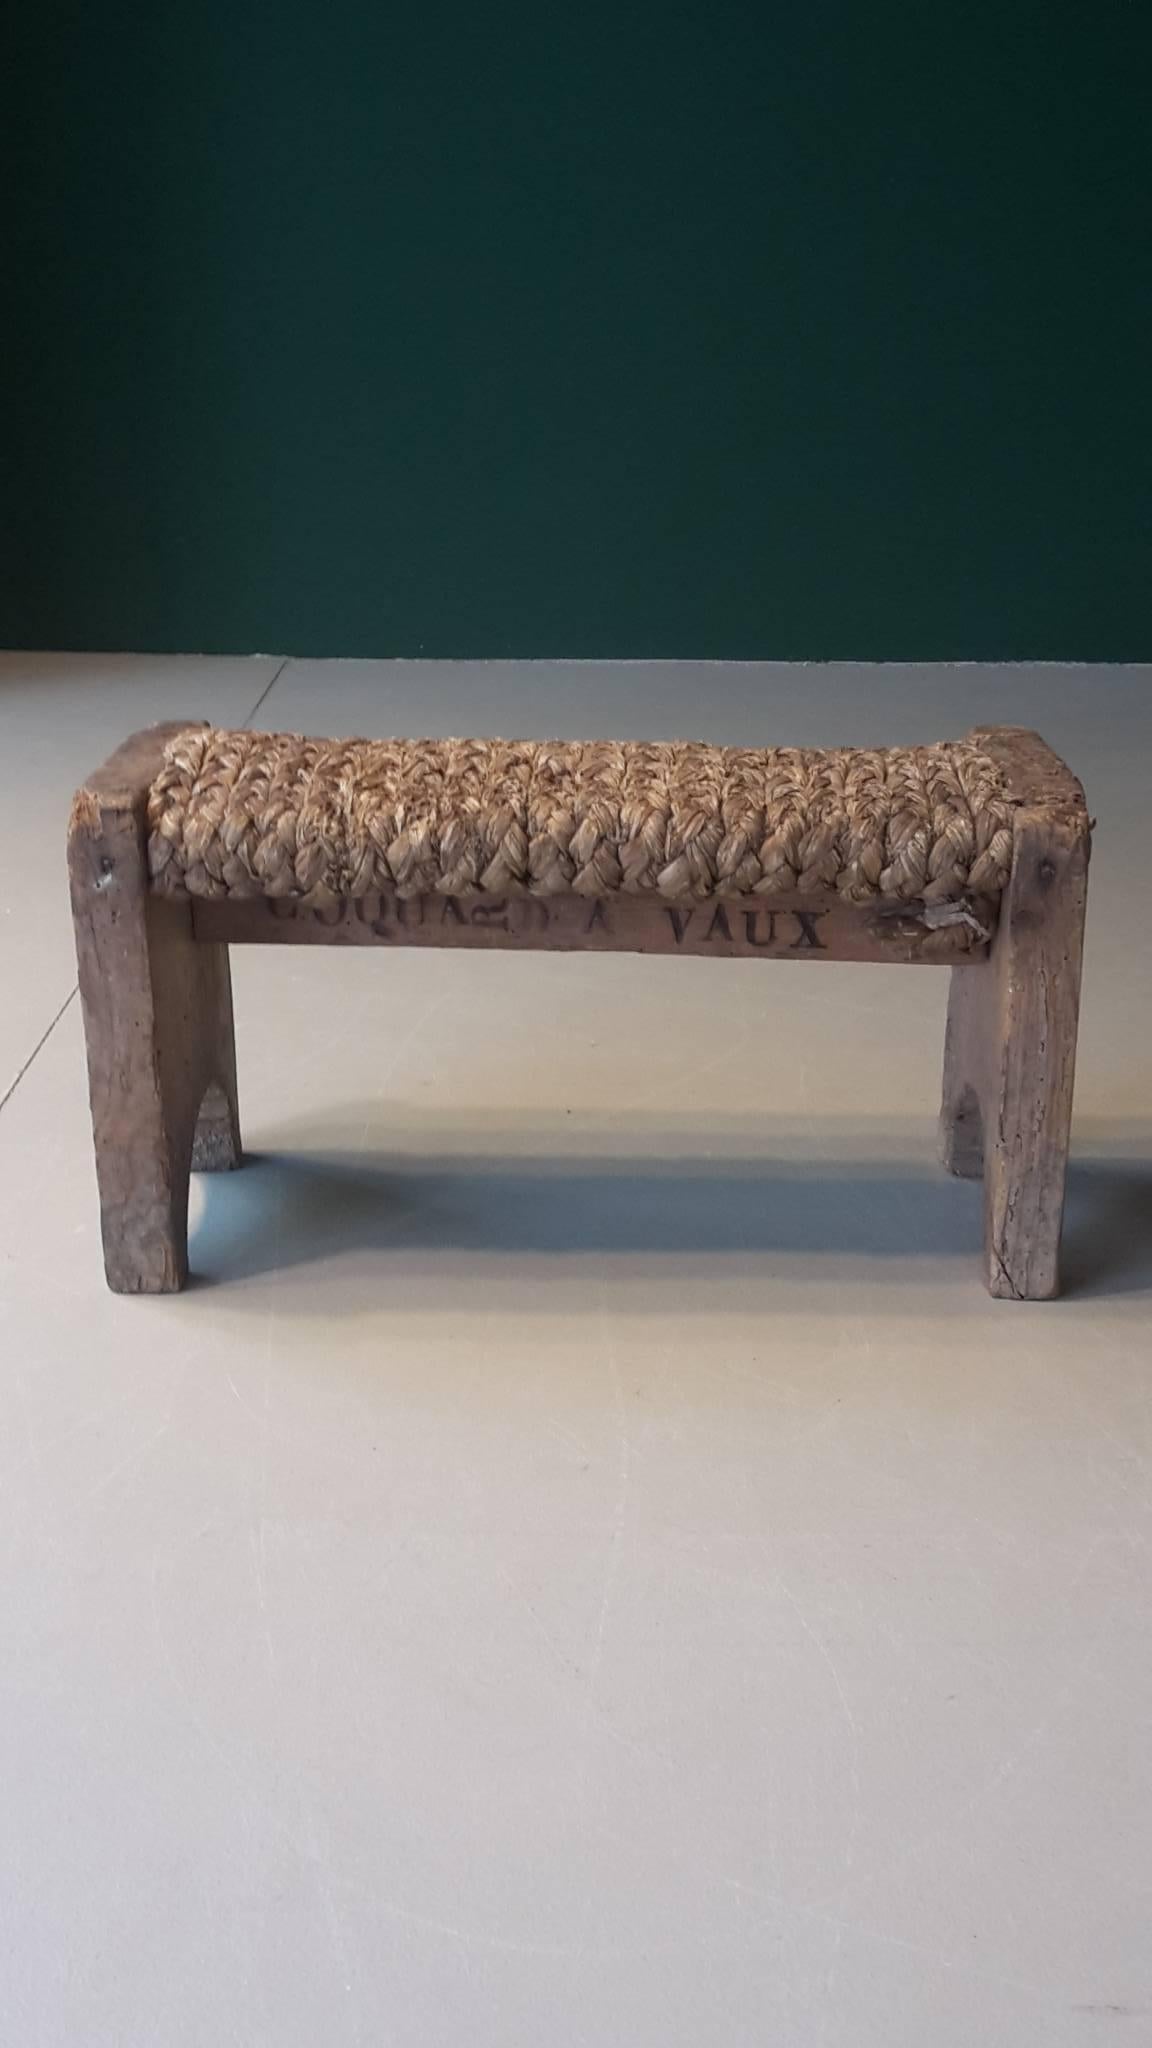 Early 19th century footstool made of straw and wood. Name of the property burned with iron on the edge.